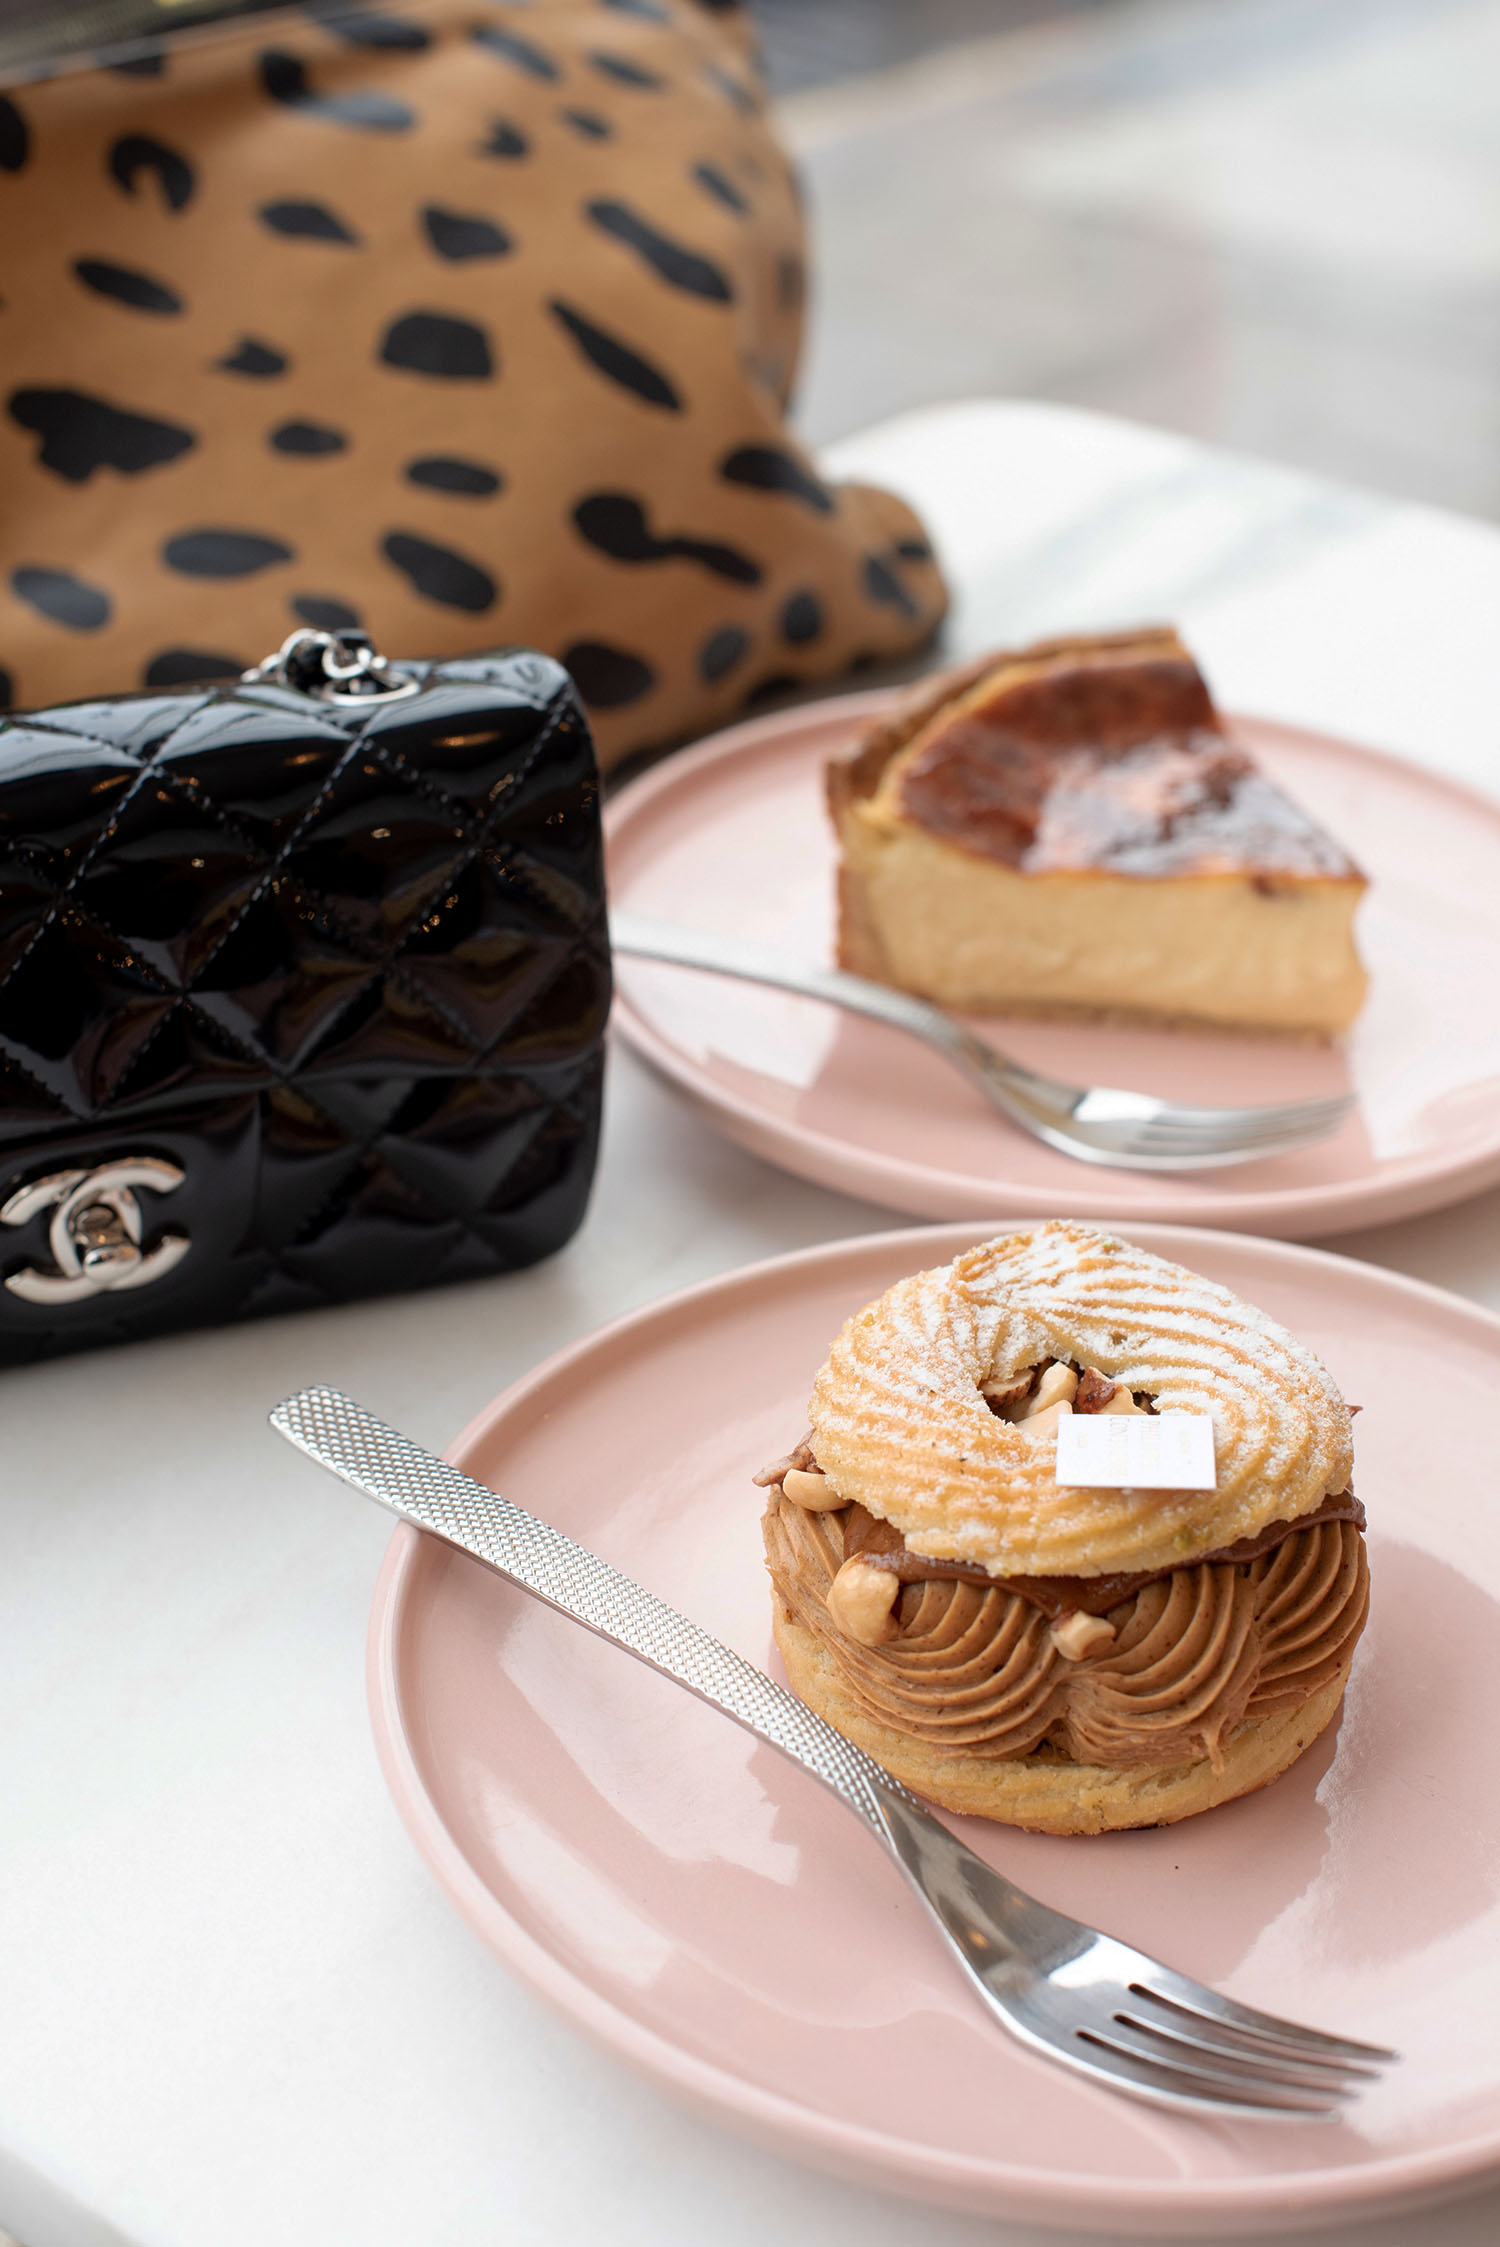 Coco & Vera - Two pastries on pink plates at Philippe Conticini in Camden